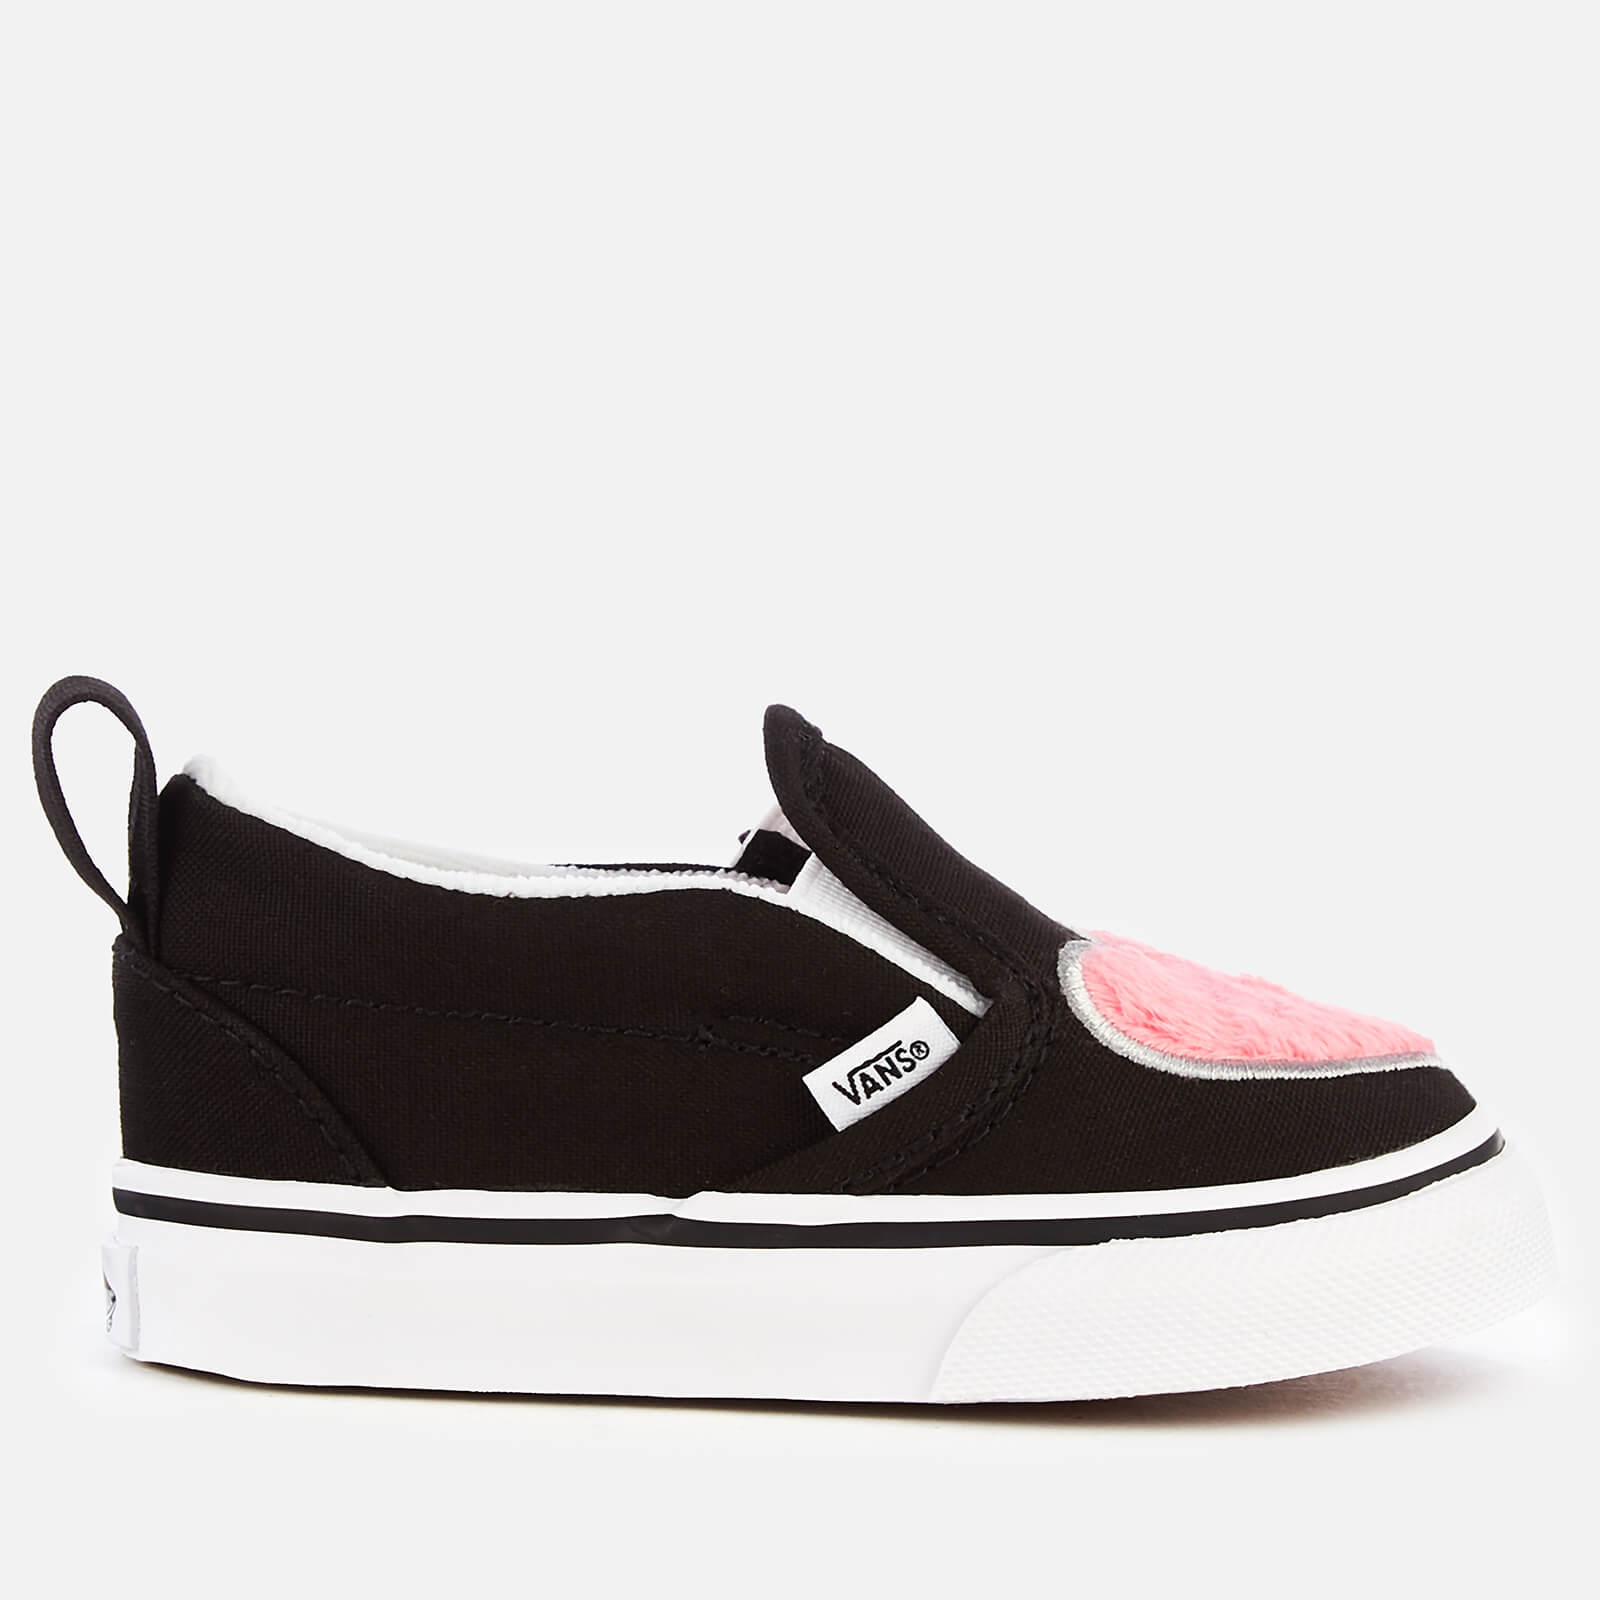 pink and black vans with hearts